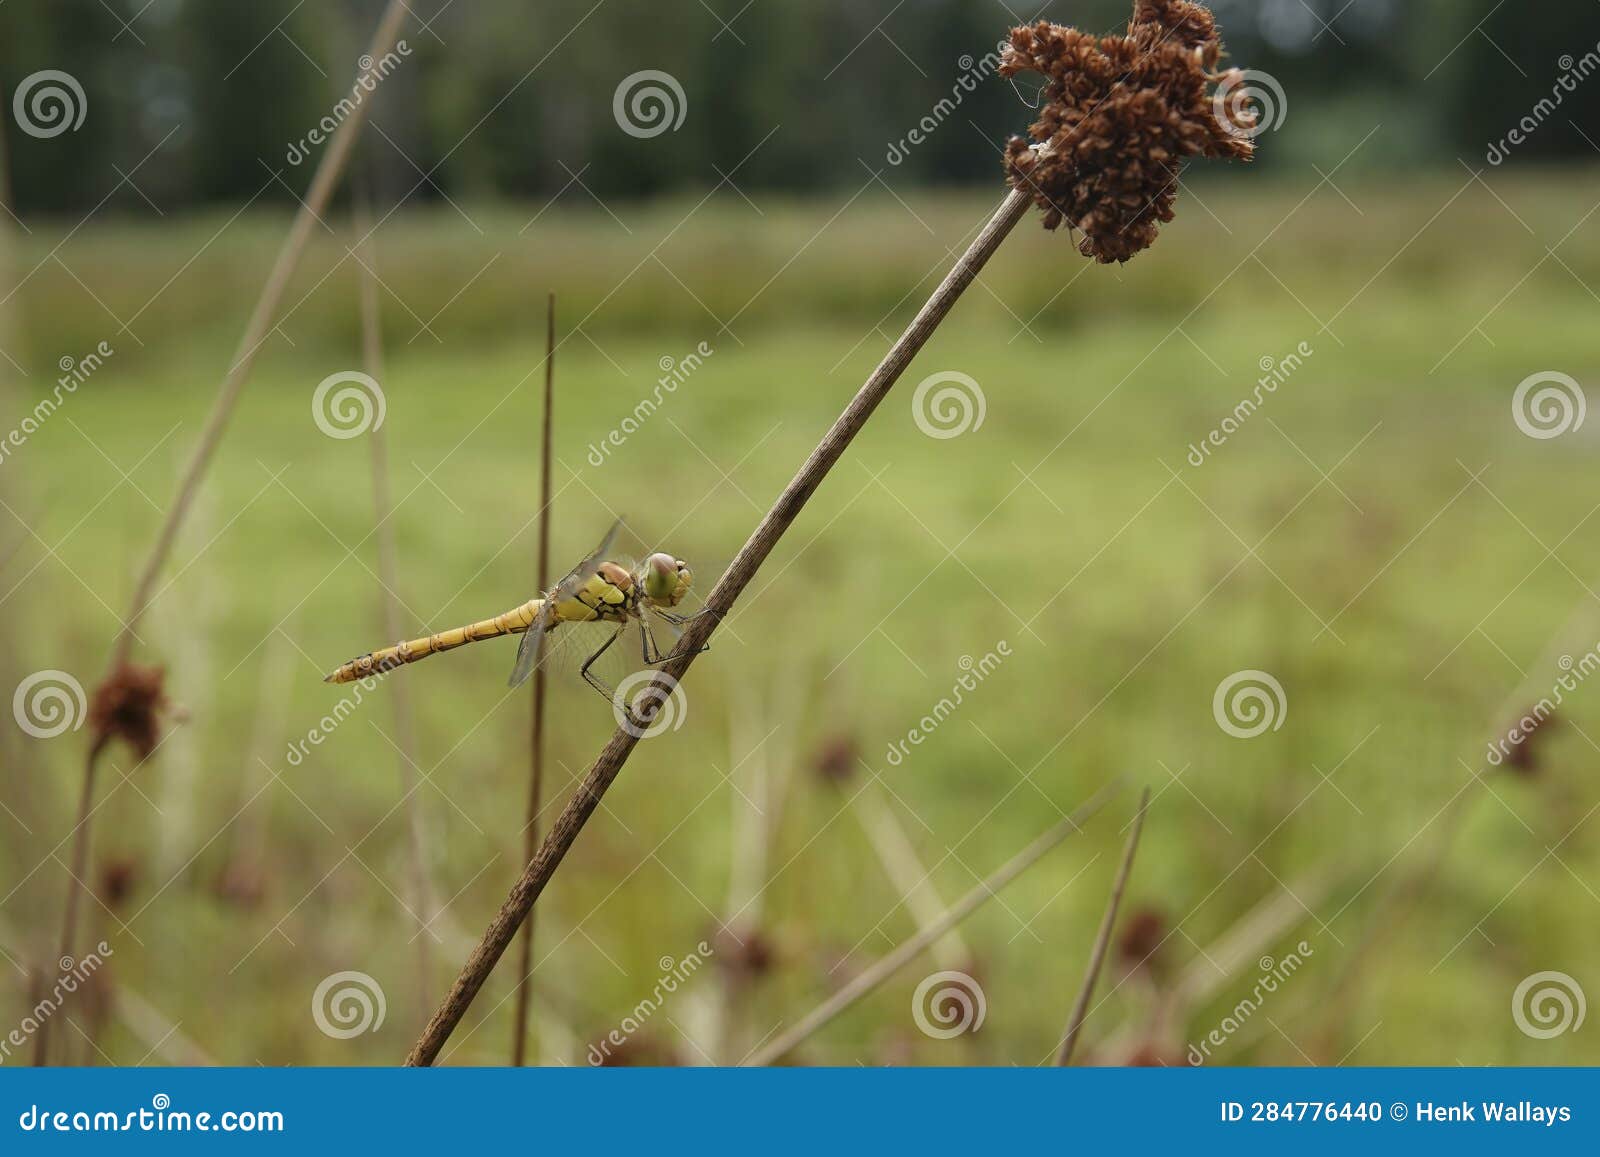 closeup on a young yellow, un-colored male common darter dragonfly sympetrum striolatum perched in the vegetation